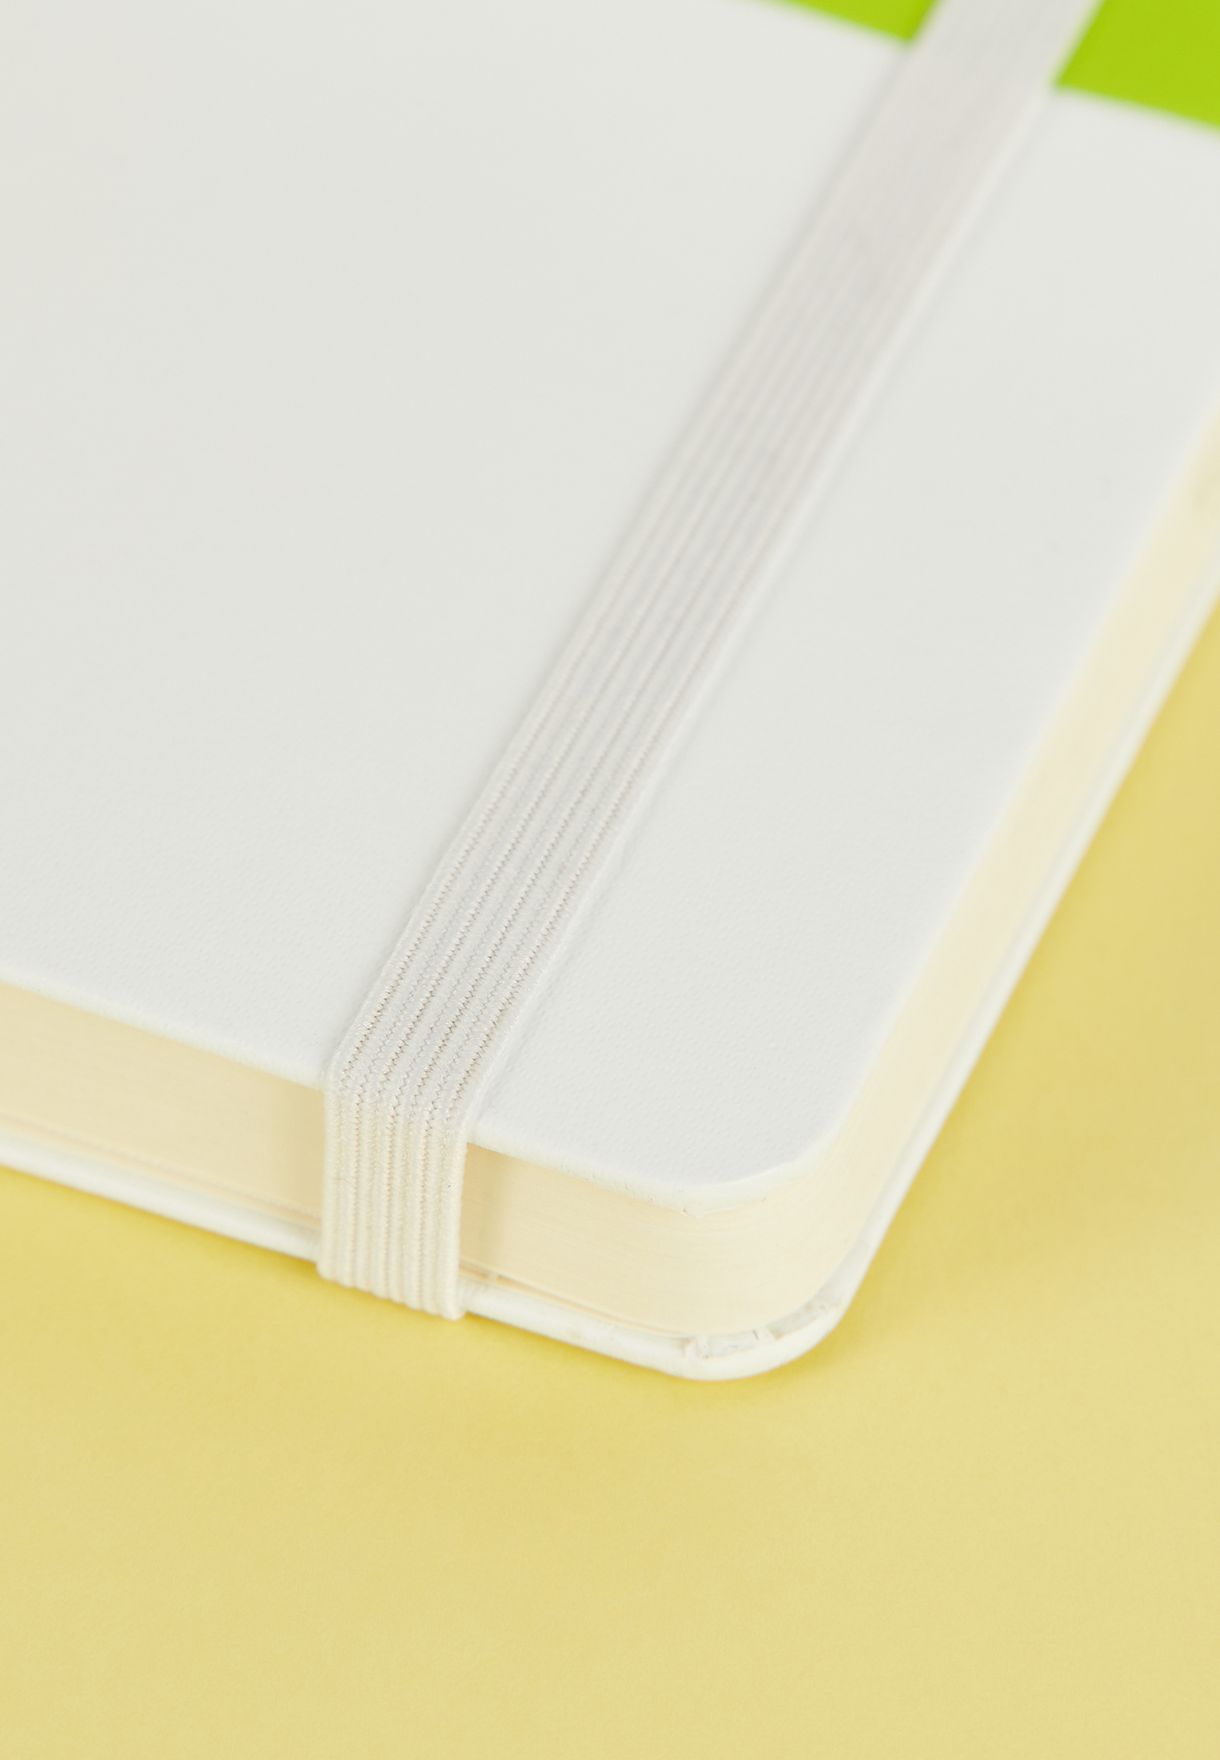 Large Plain Hard Cover Notebook